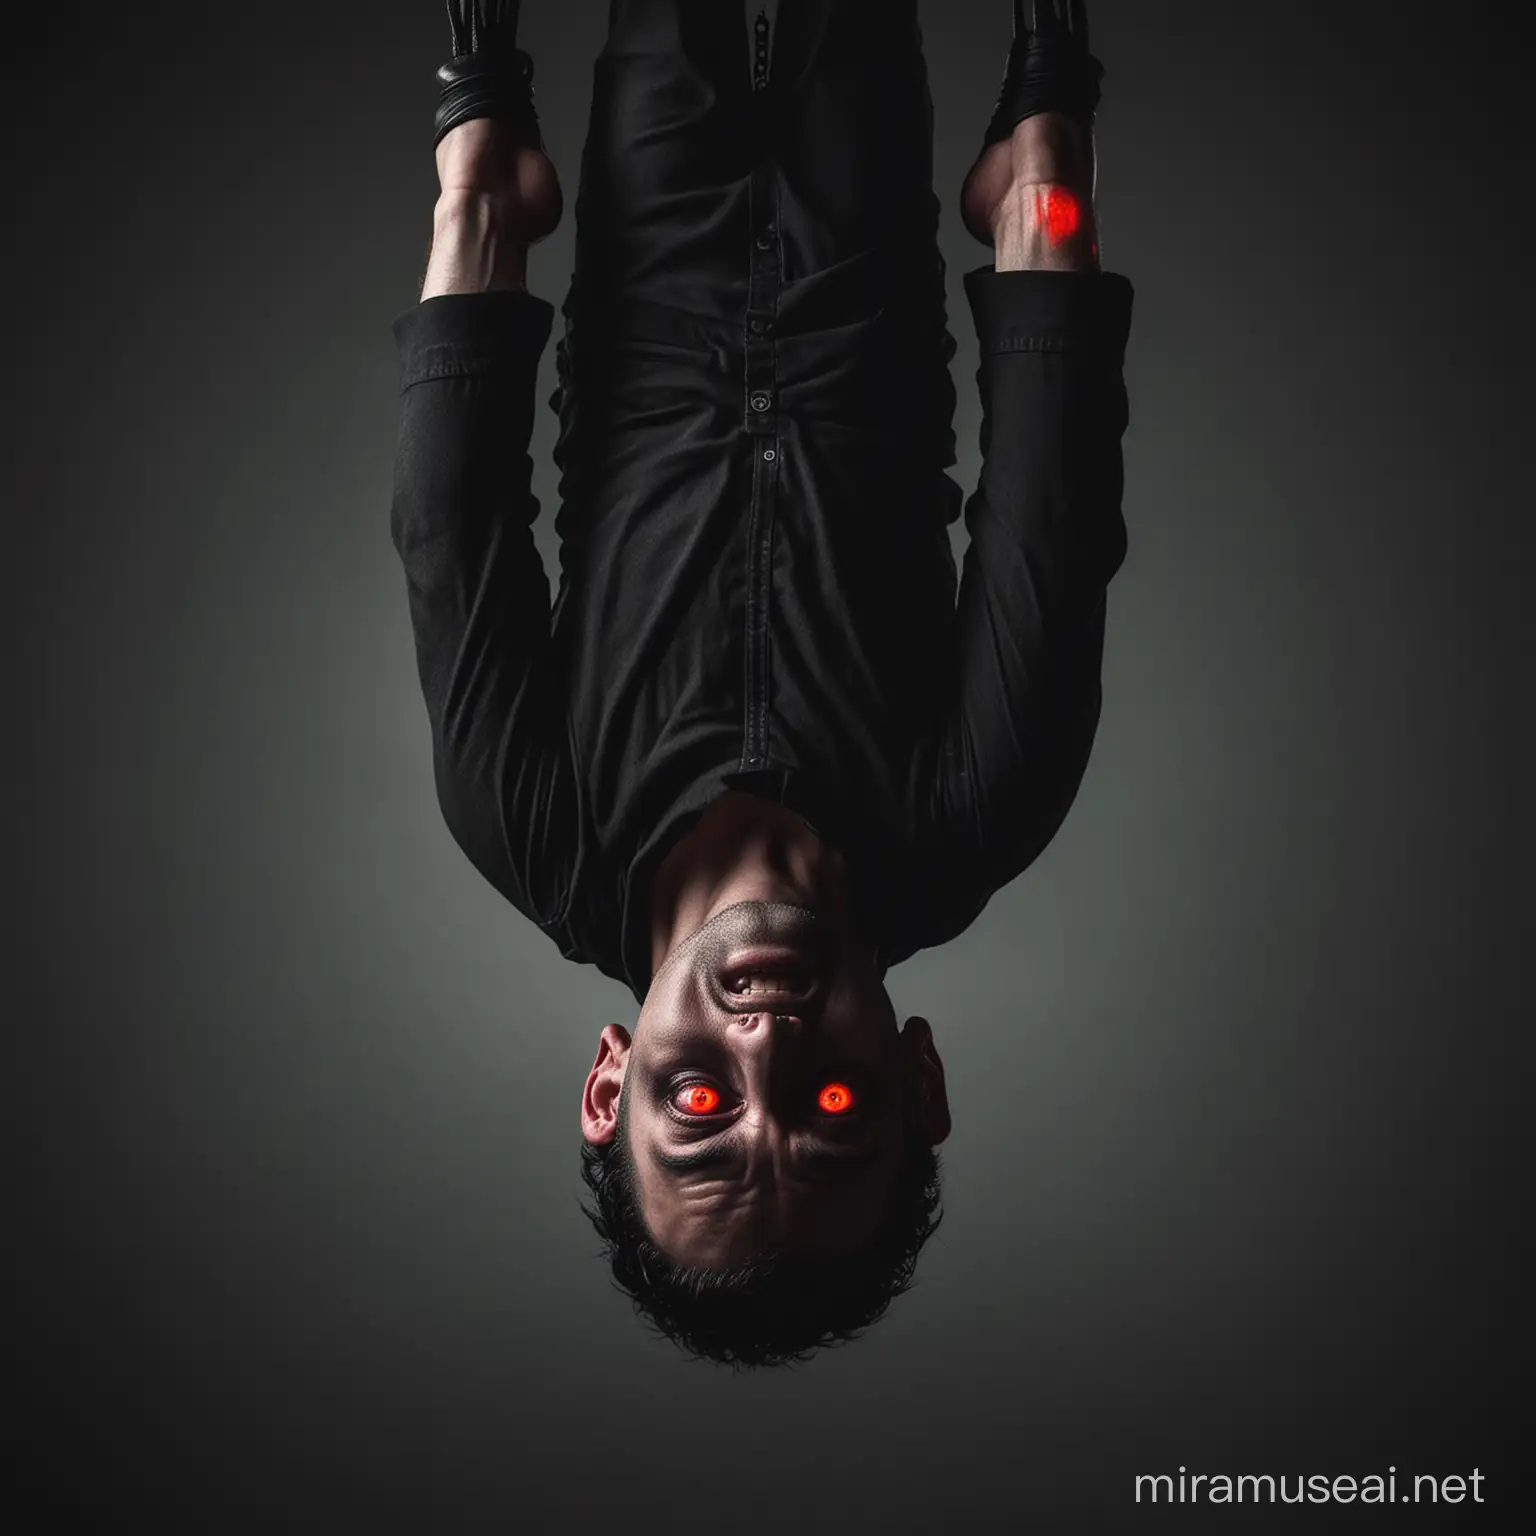 Male Body hanging upside down with glowing red eyes and a  freakishly dark like appearance